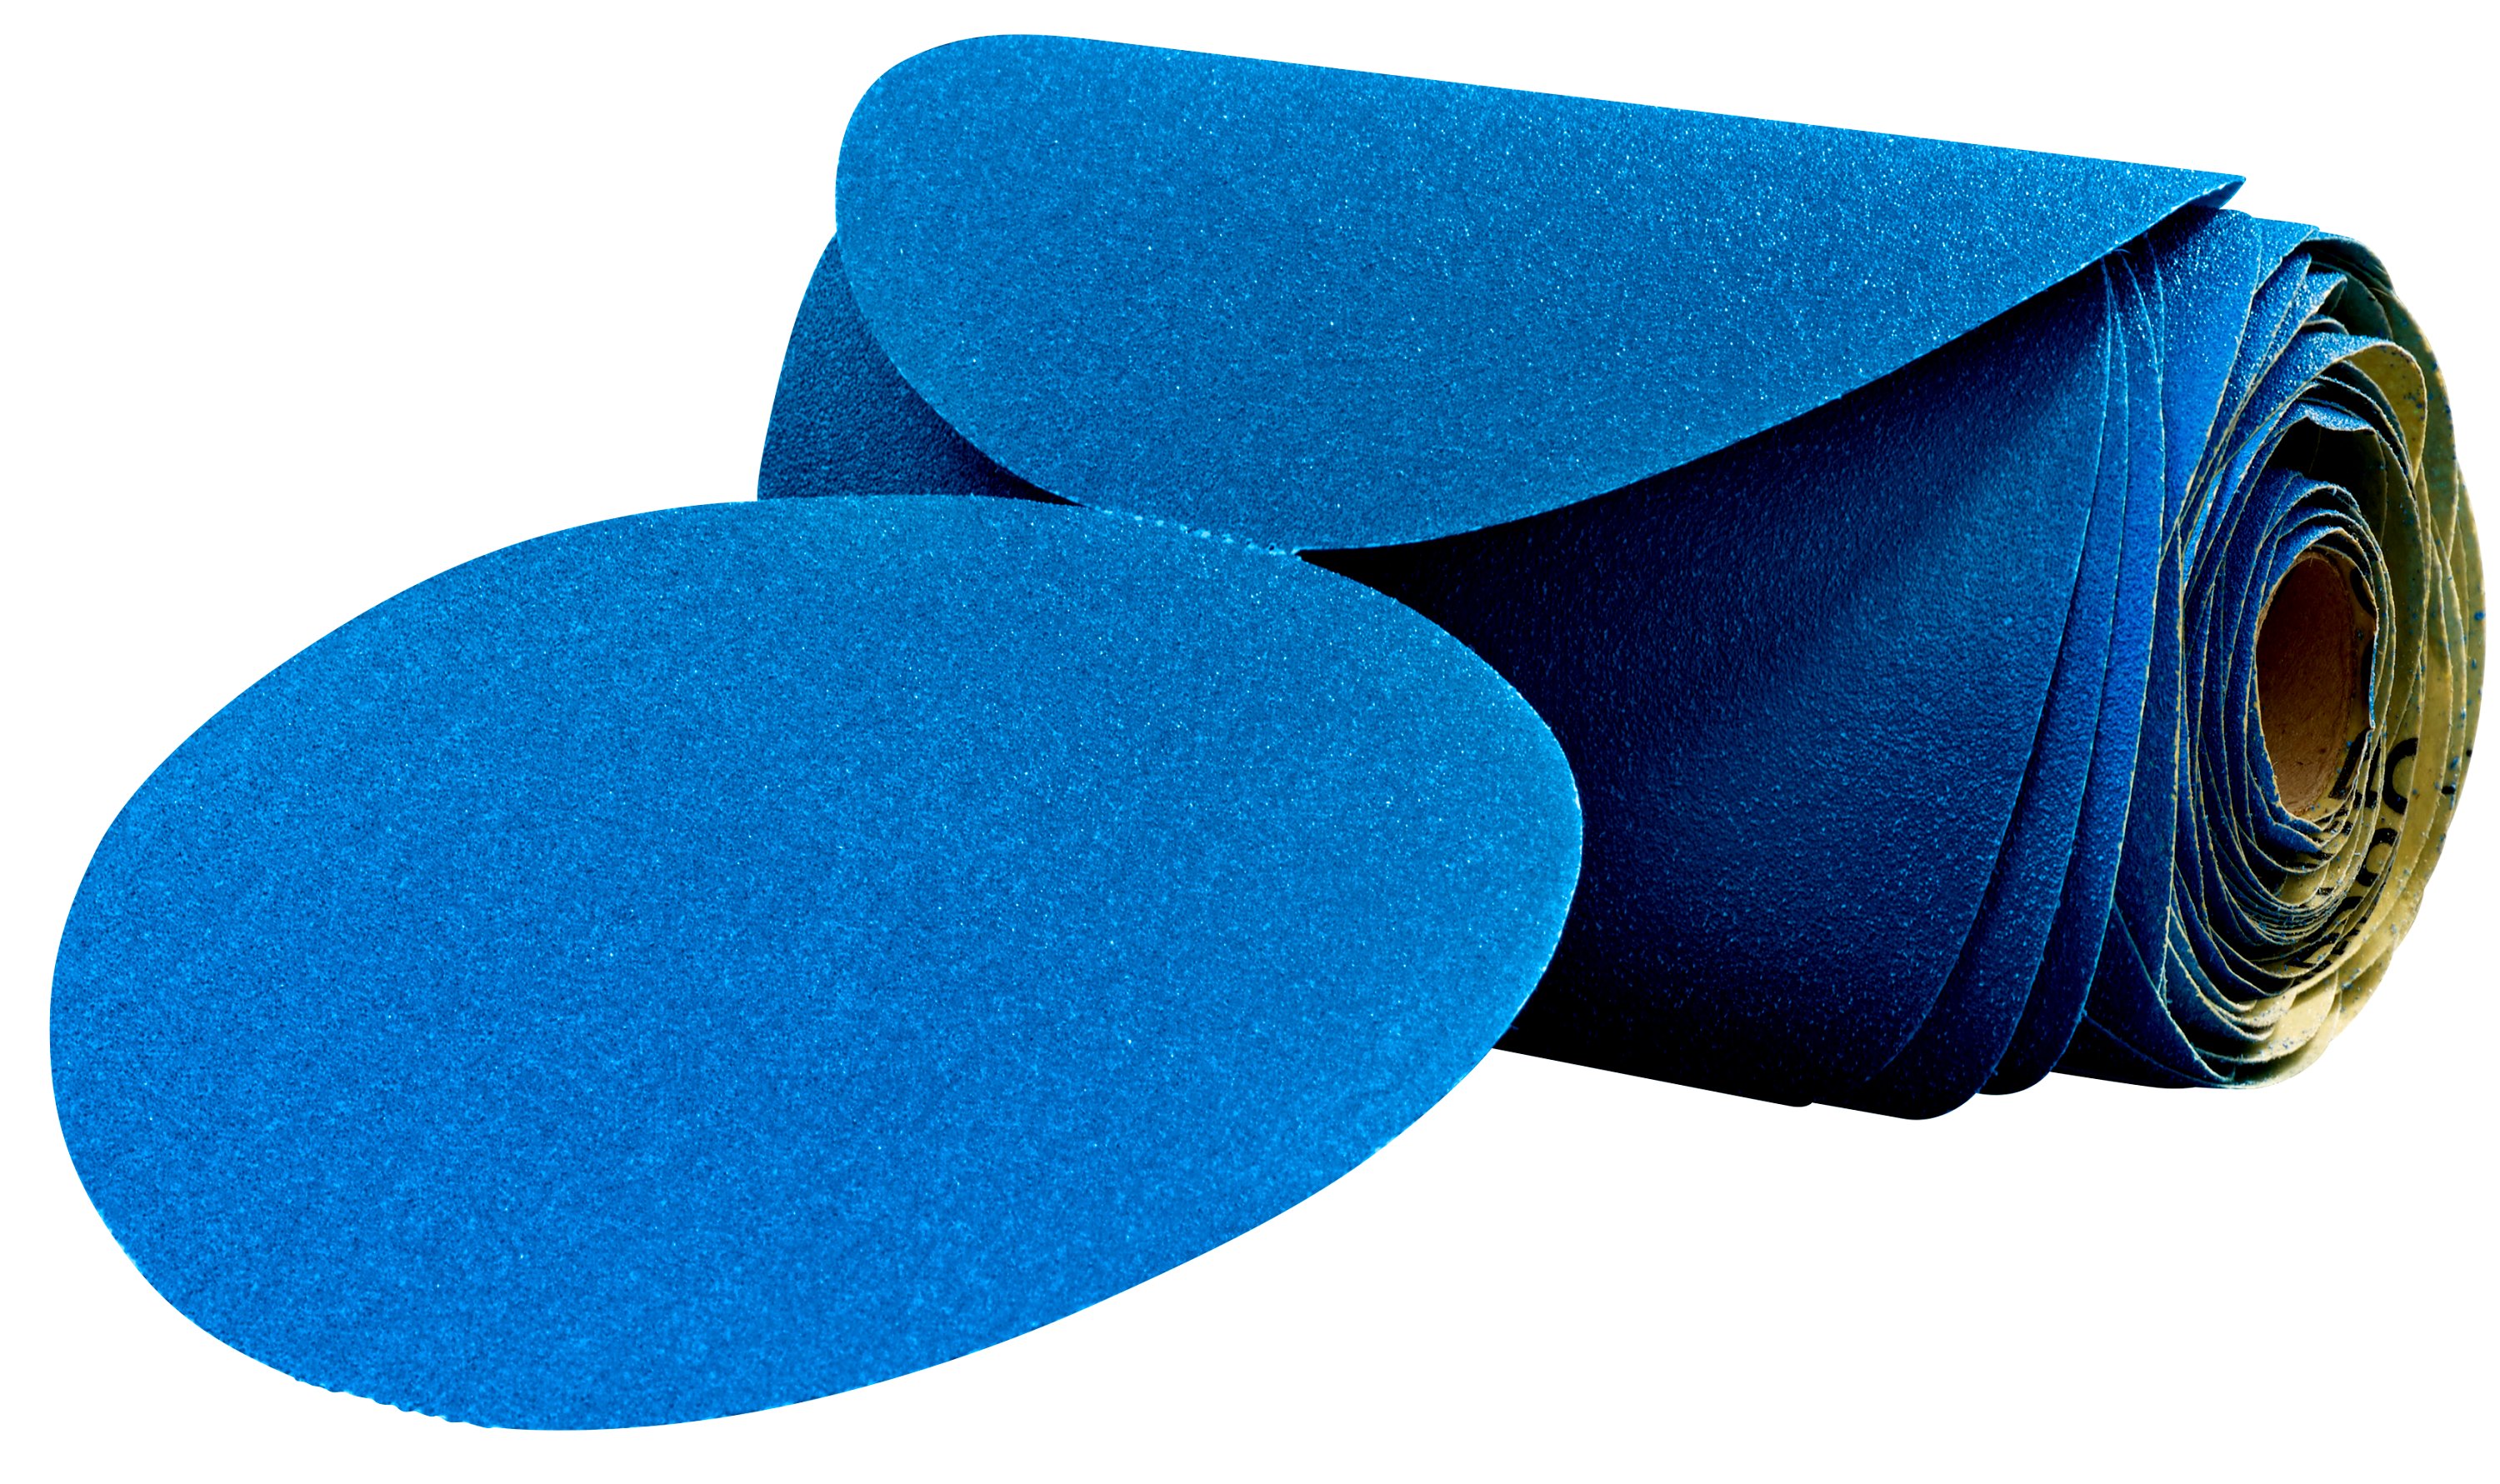 Part of a full line of 3M™ Blue Abrasives, the 3M™ Stikit™ Blue Abrasive Disc Rolls is engineered for best-in-class cut, life and efficiency across your entire shop.